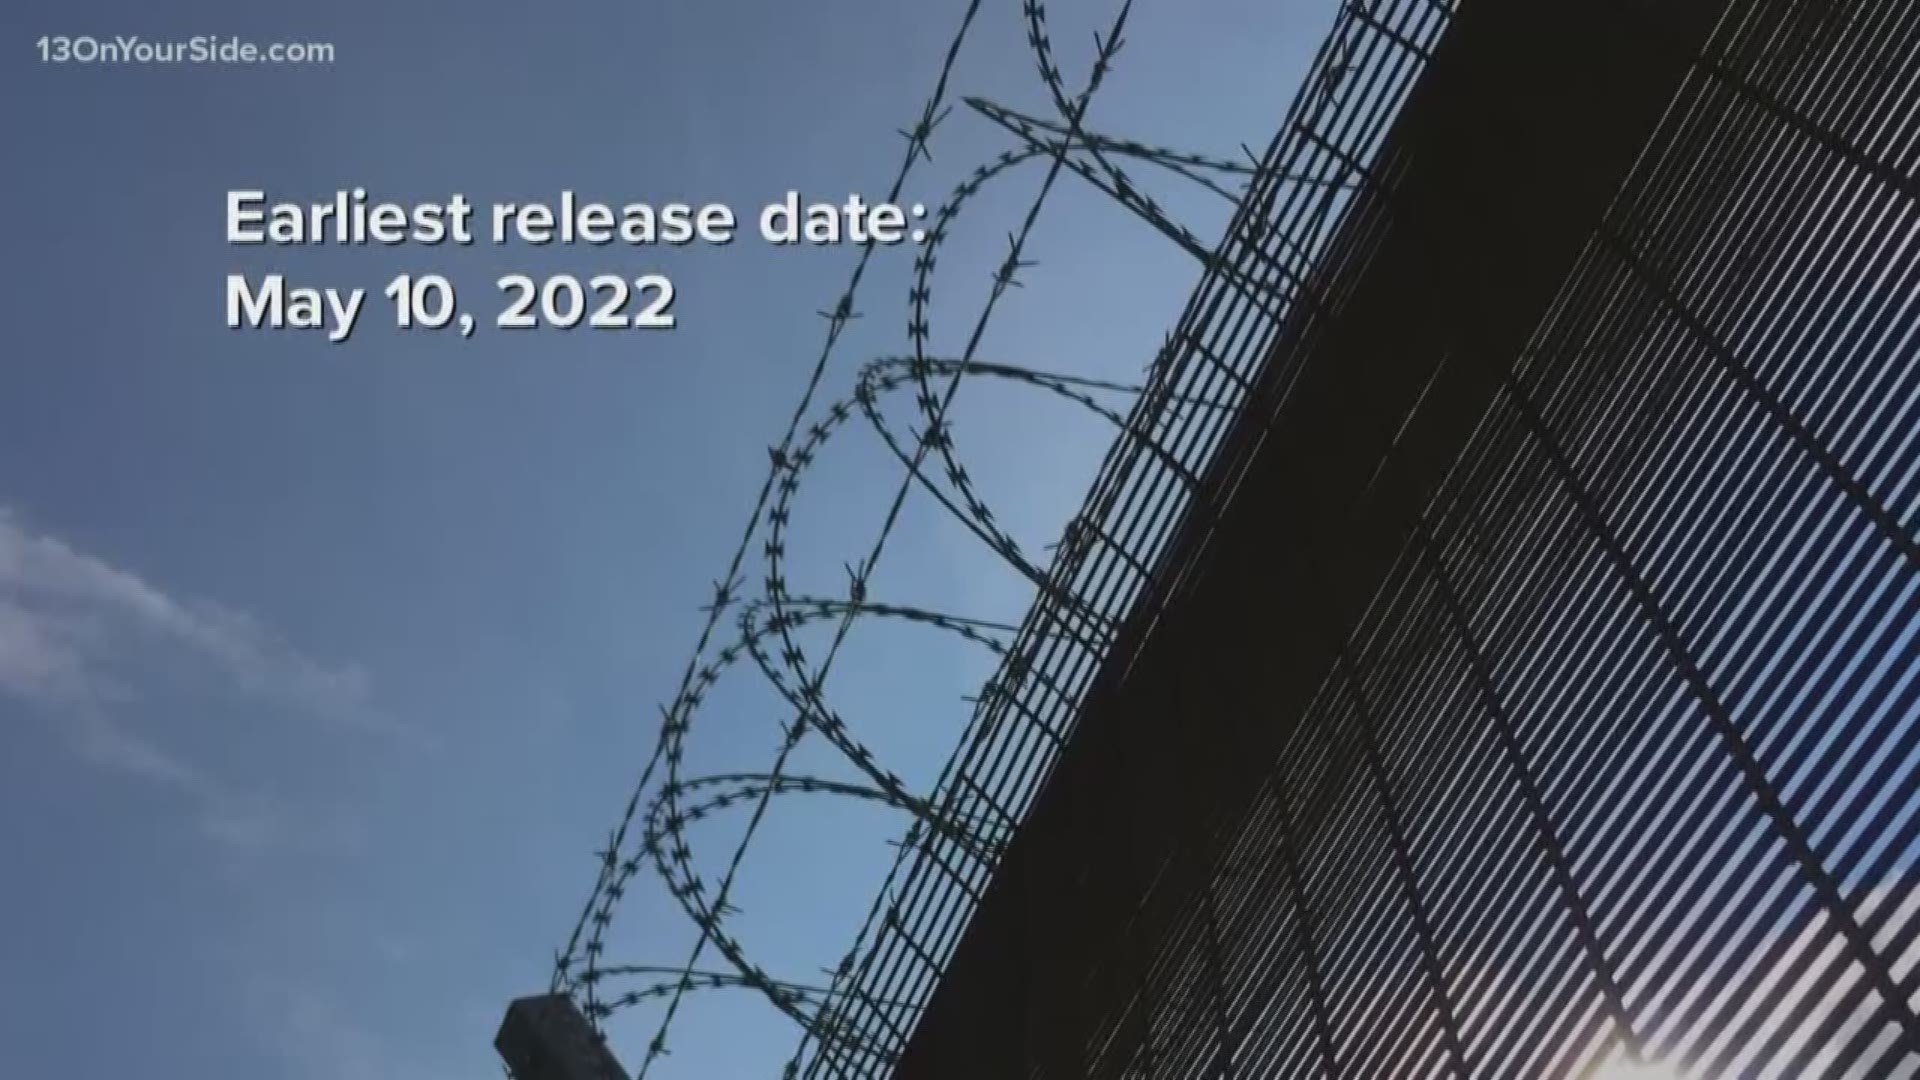 As the case count increases, loved ones of at-risk inmates, are concerned about their safety.